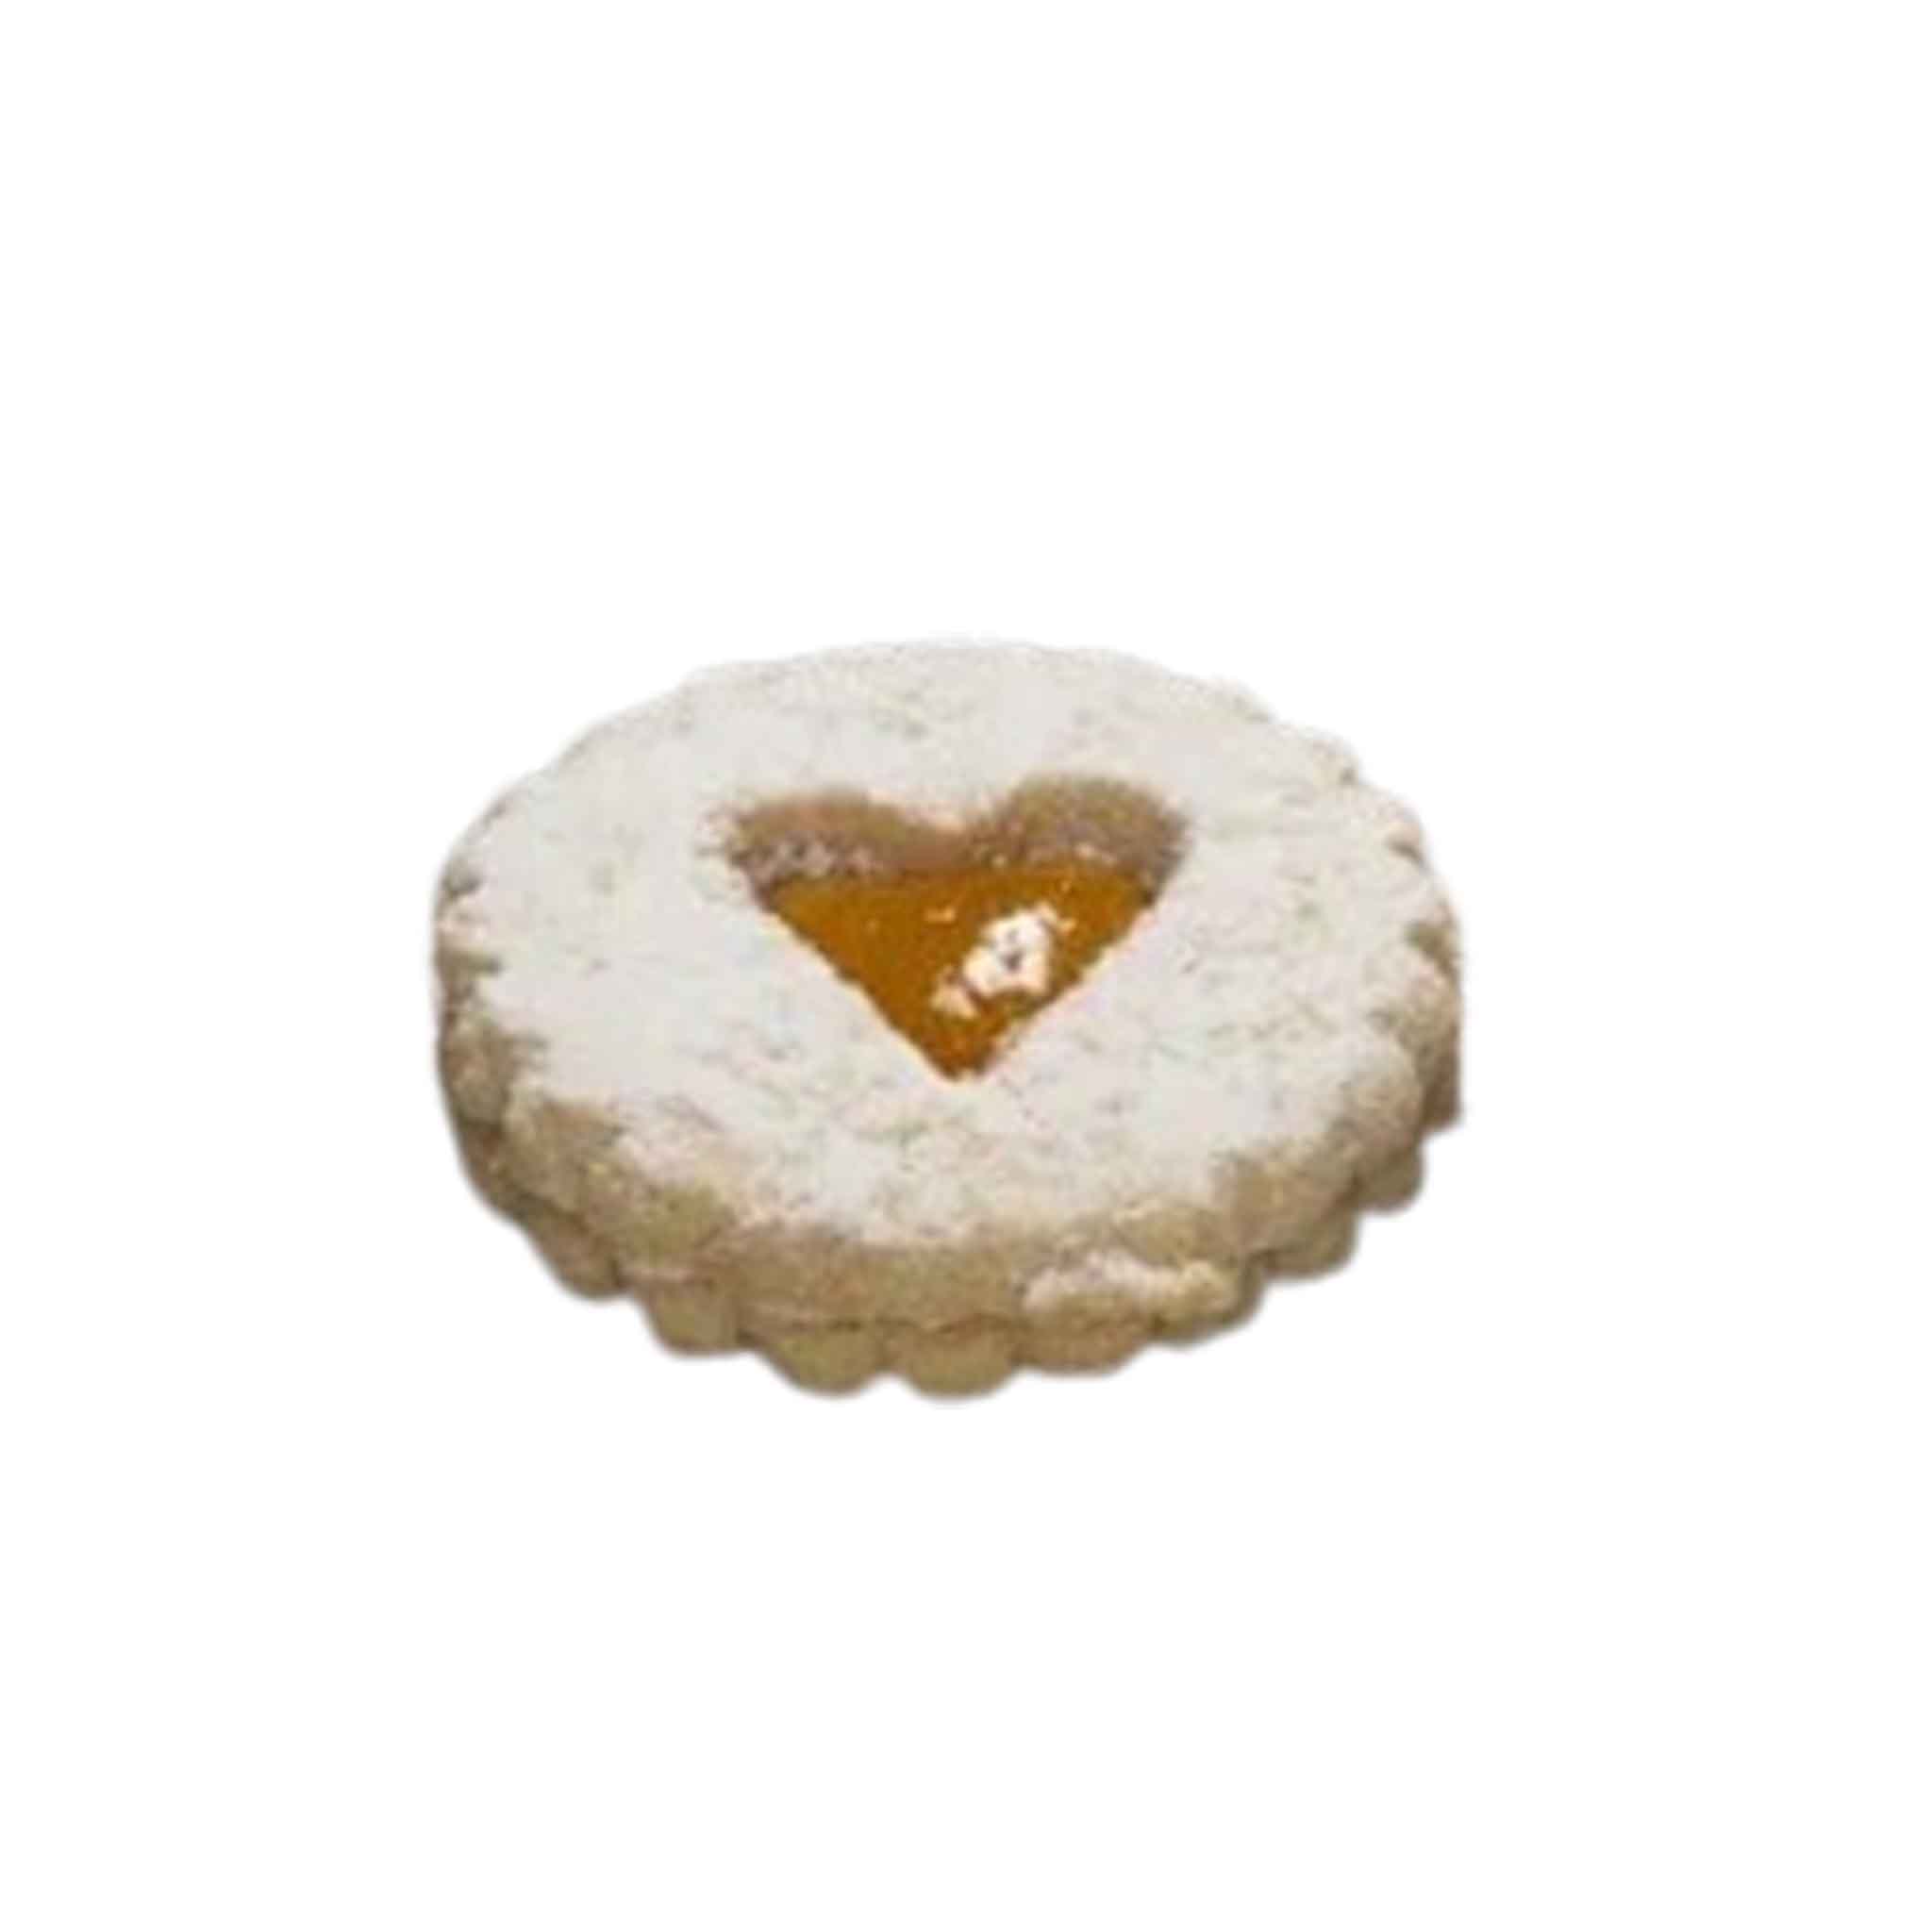 AMORE COOKIES GLUTEN FREE APRICOT LINZER 170g